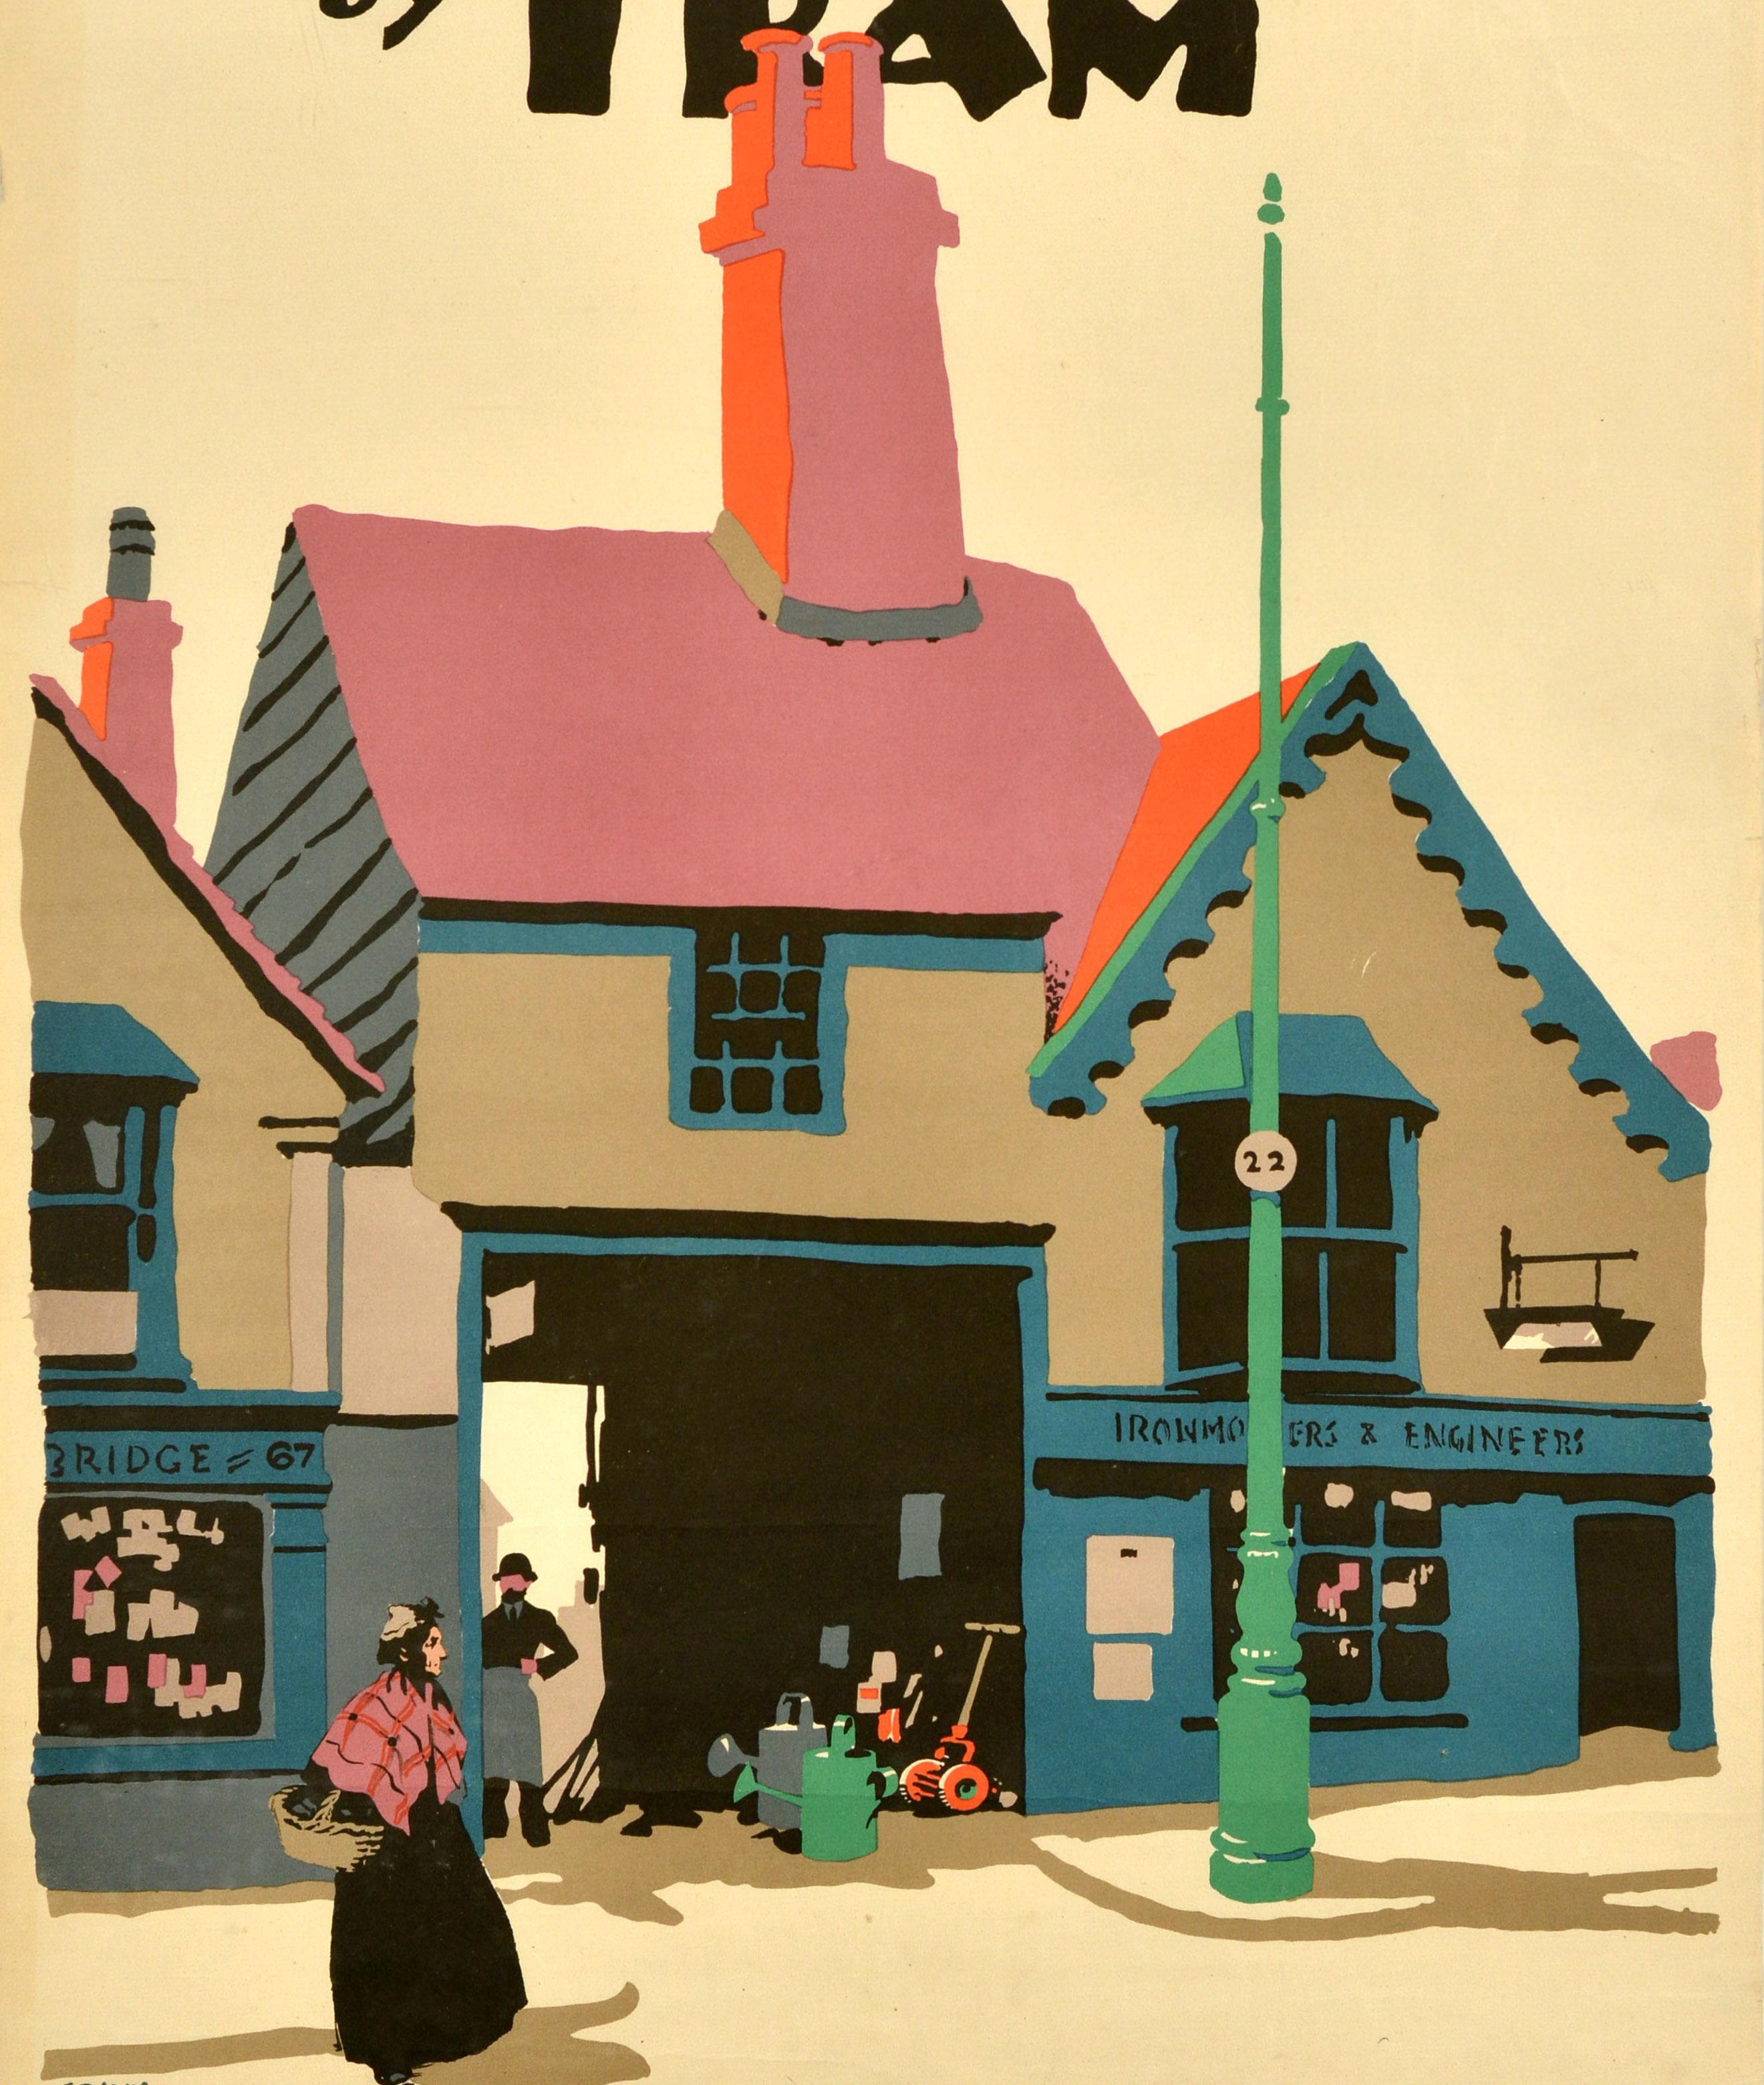 Original vintage travel poster - Edgware by Tram - featuring a colourful image by the notable British poster artist Frank Newbould (1887-1951) depicting a lady wearing a shawl and carrying a basket in front of shop buildings, one number 67 and